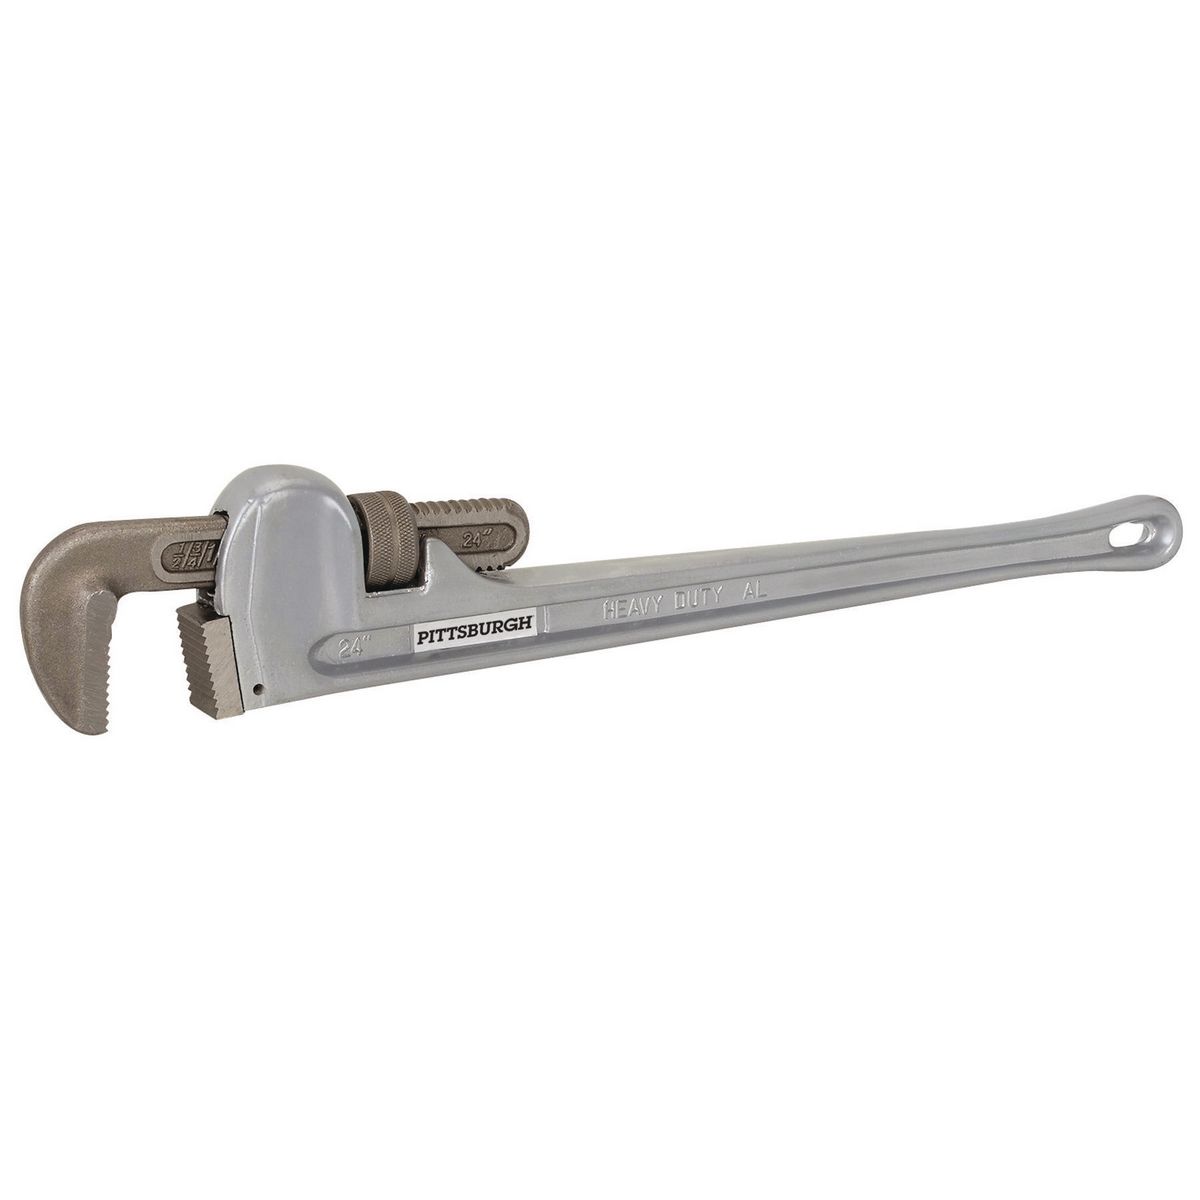 PITTSBURGH 24 in. Aluminum Pipe Wrench - Item 63649 / 39606 / 60526